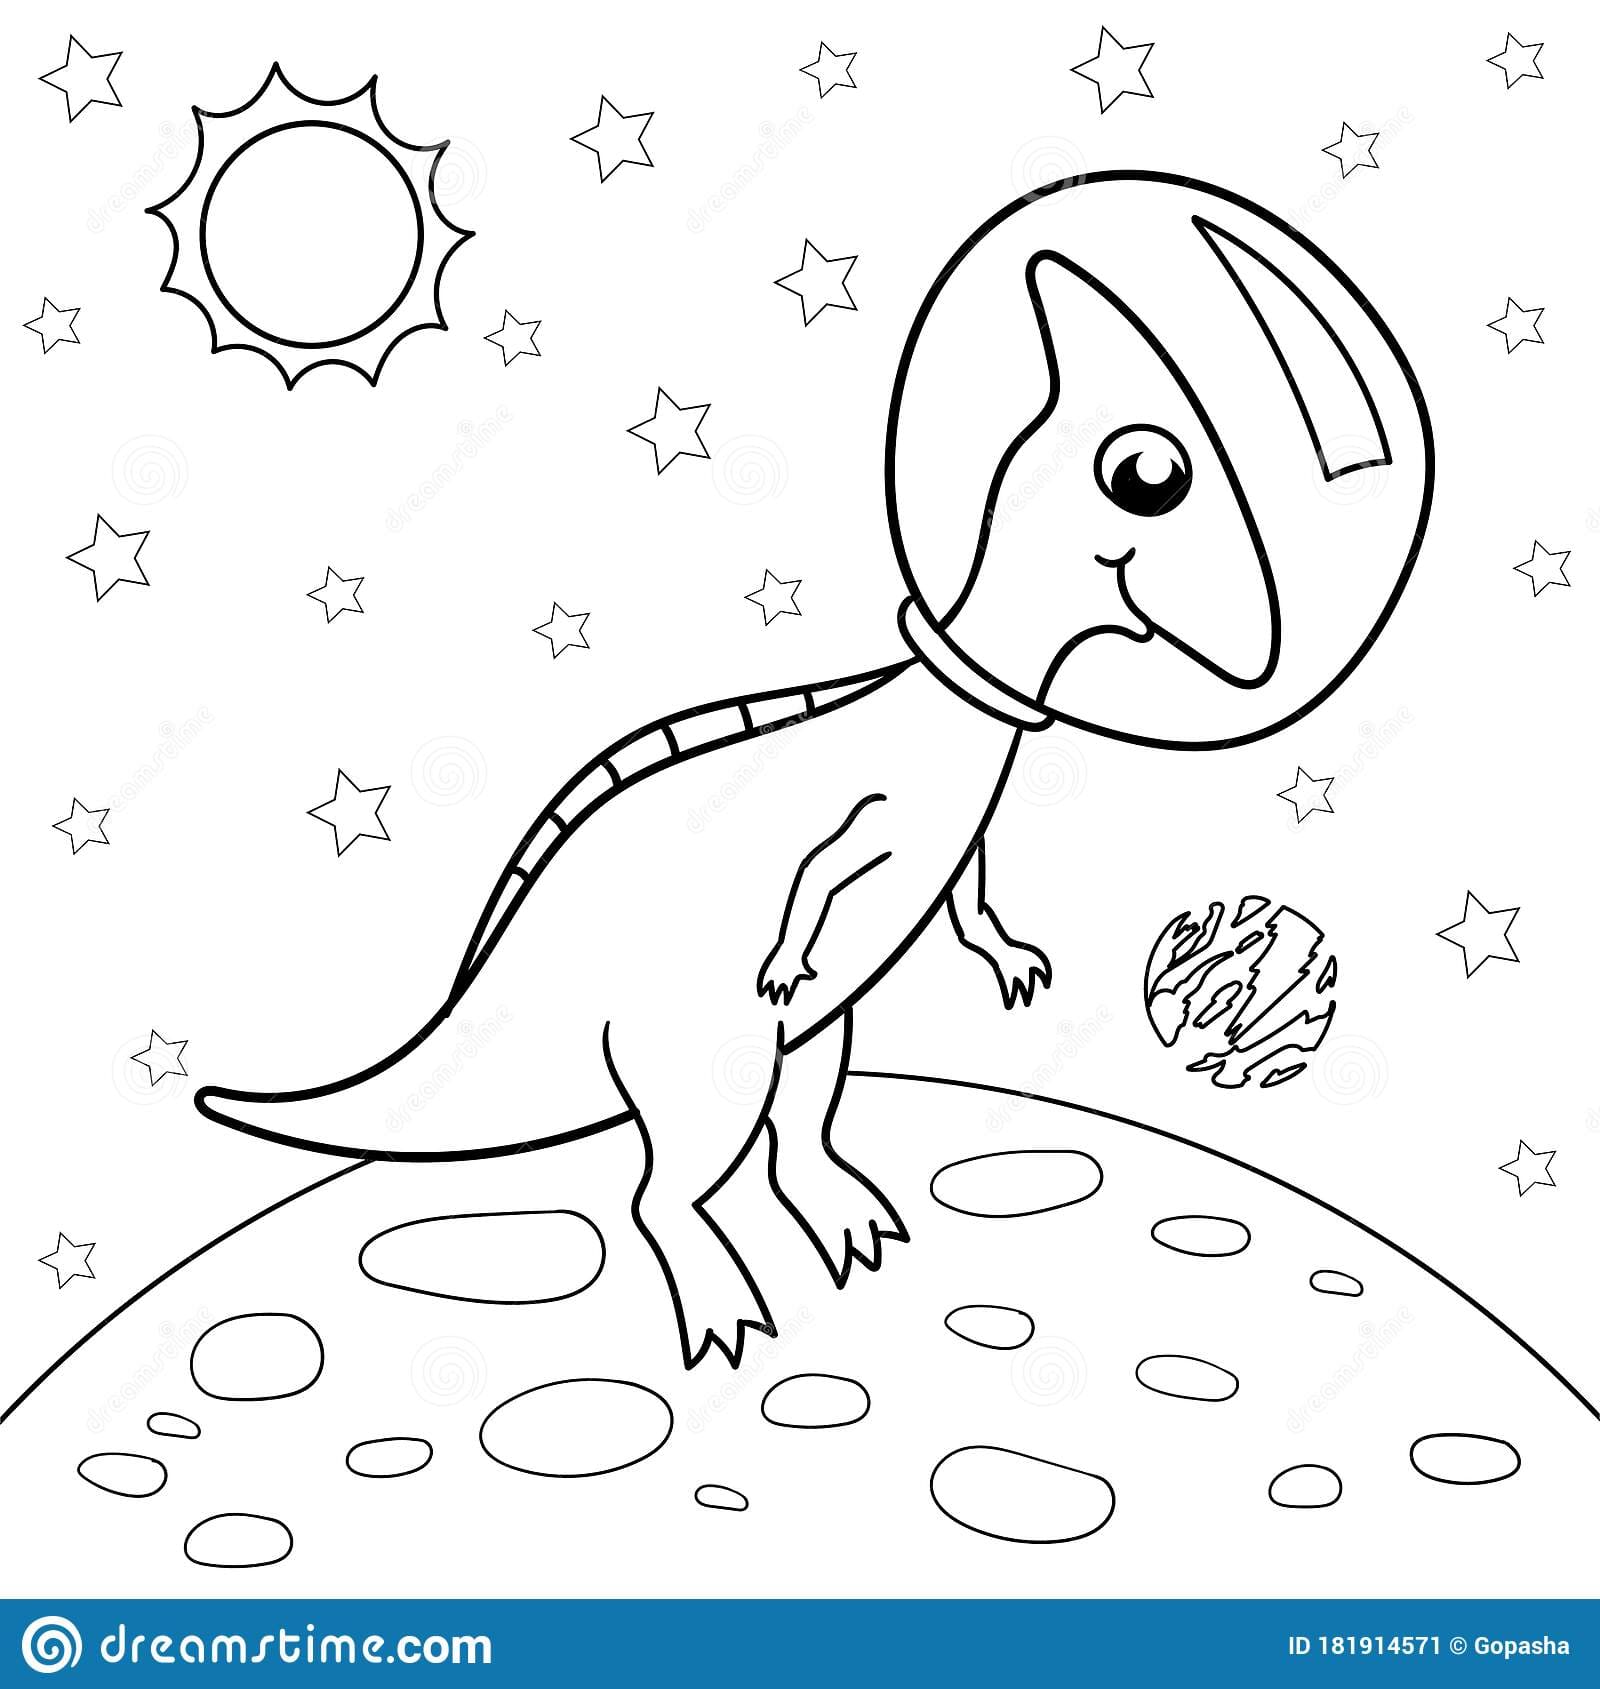 Astronaut For Children Printable Coloring Page